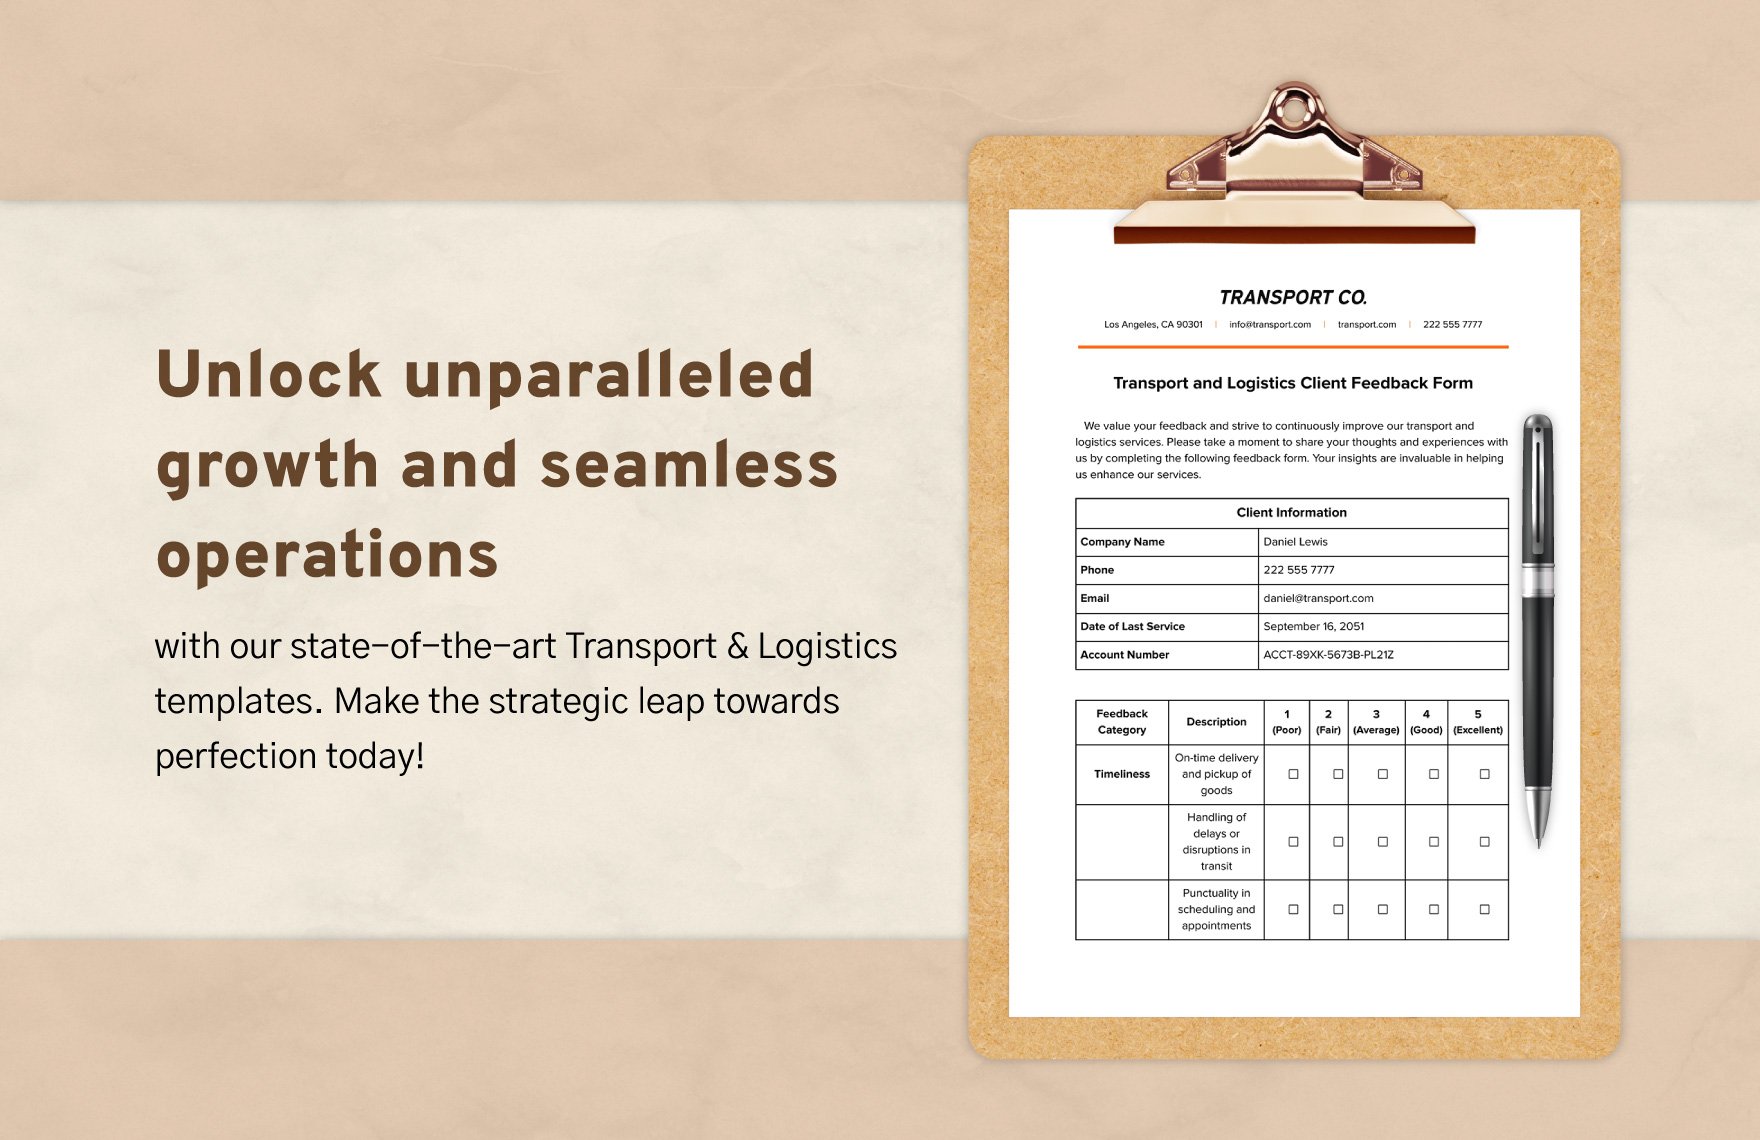 Transport and Logistics Client Feedback Form Template